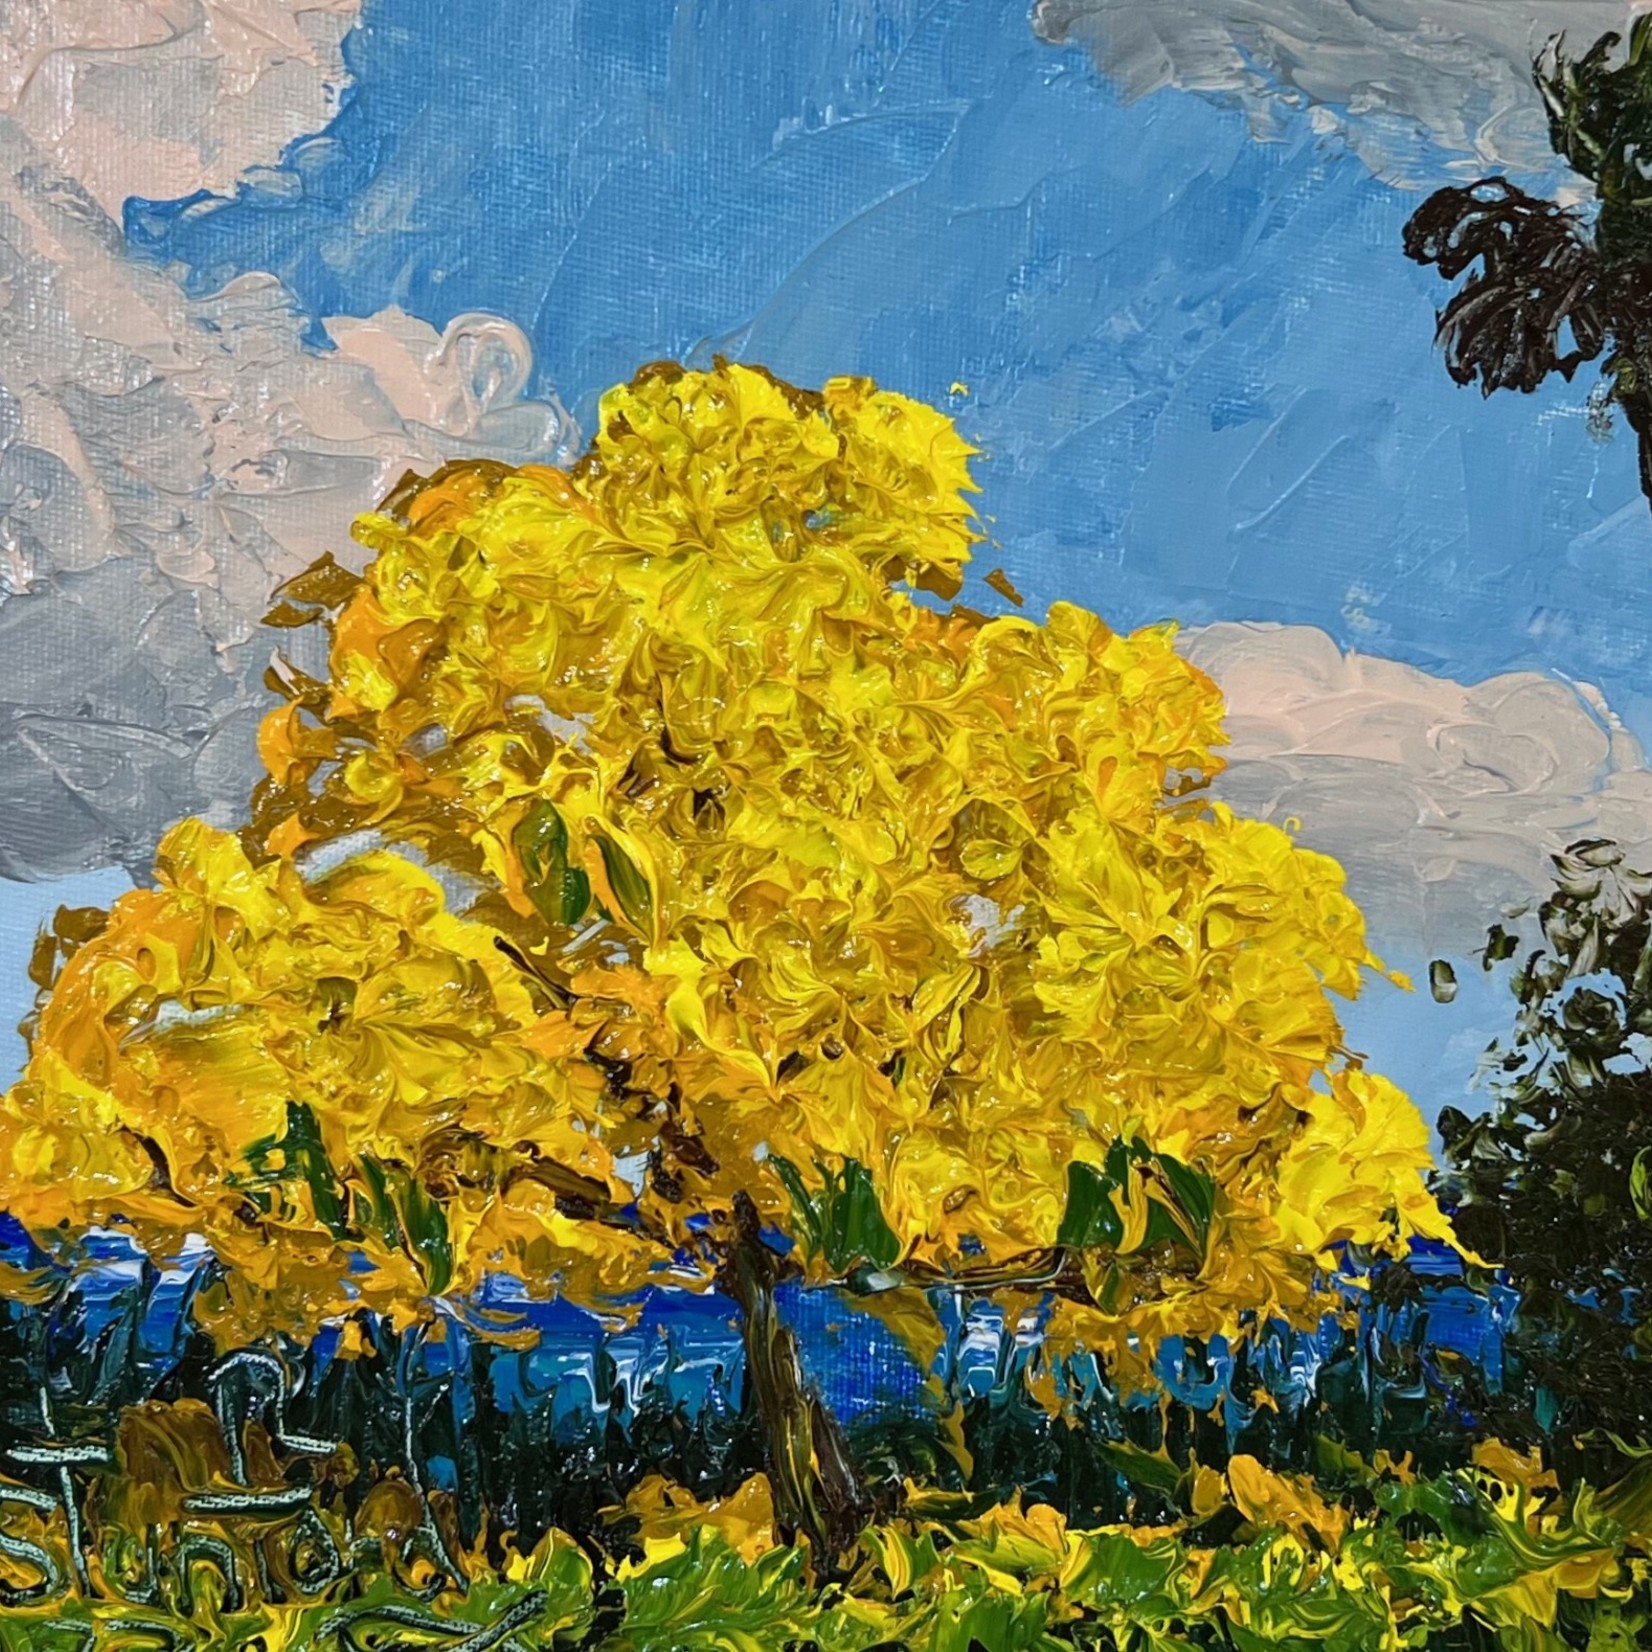 Highwaymen: Original, 2nd Generation, Legacy Yellow Poinciana by Mark Stanford, oil on canvas framed, 15x13", RARE